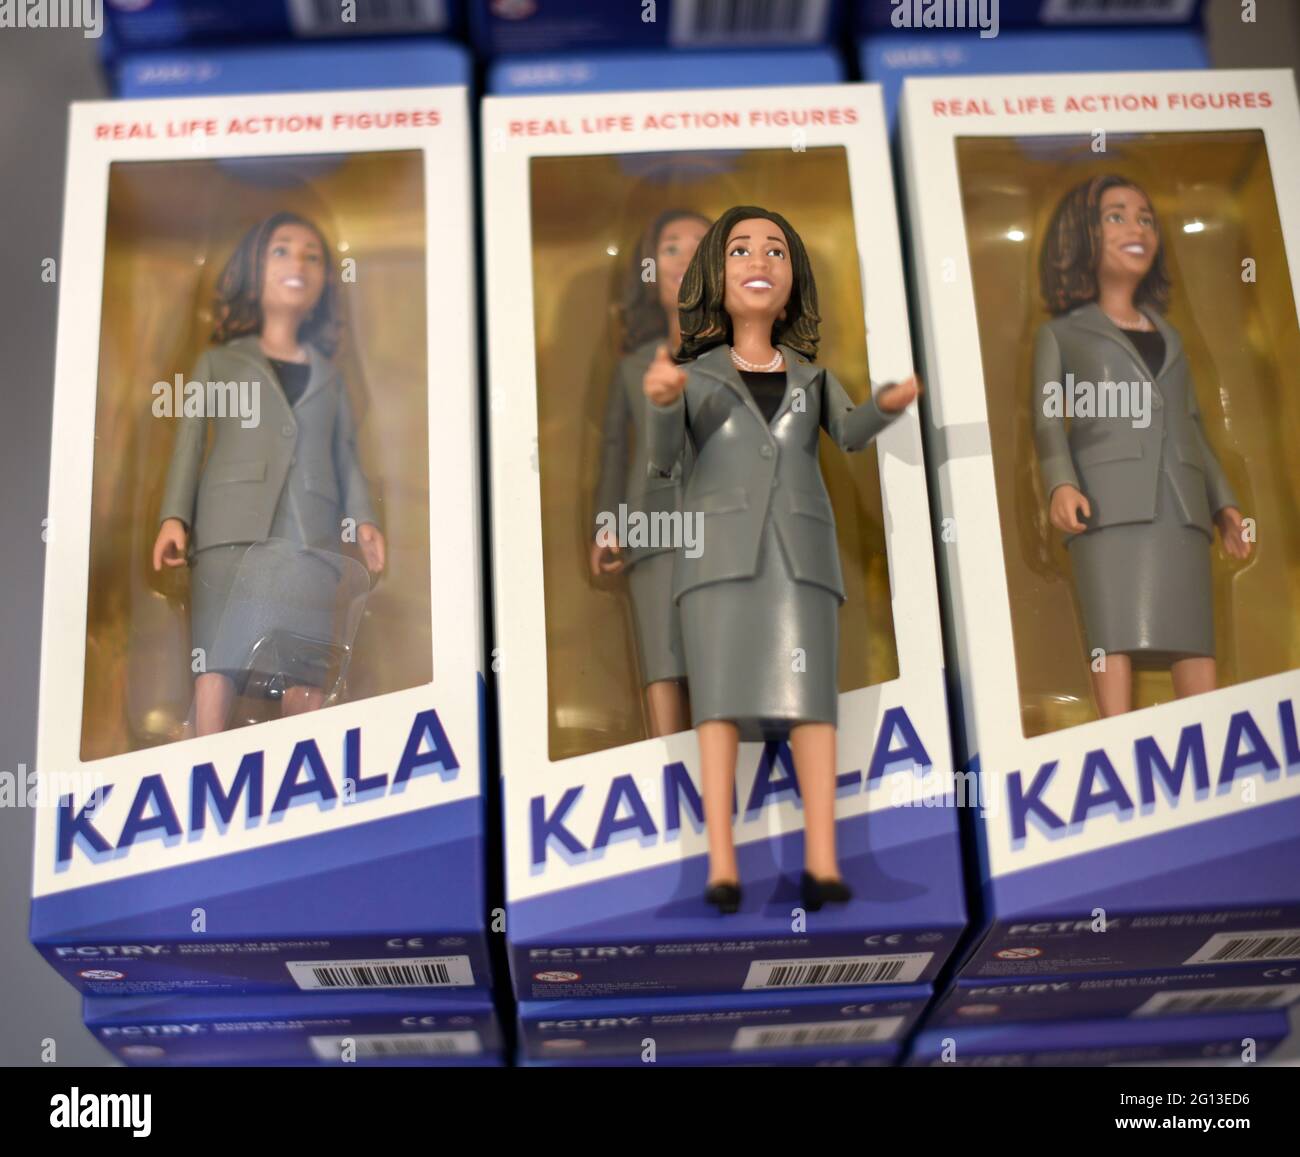 U.S. Vice President Kamala Harris action figures for sale in a store in New Mexico. Stock Photo